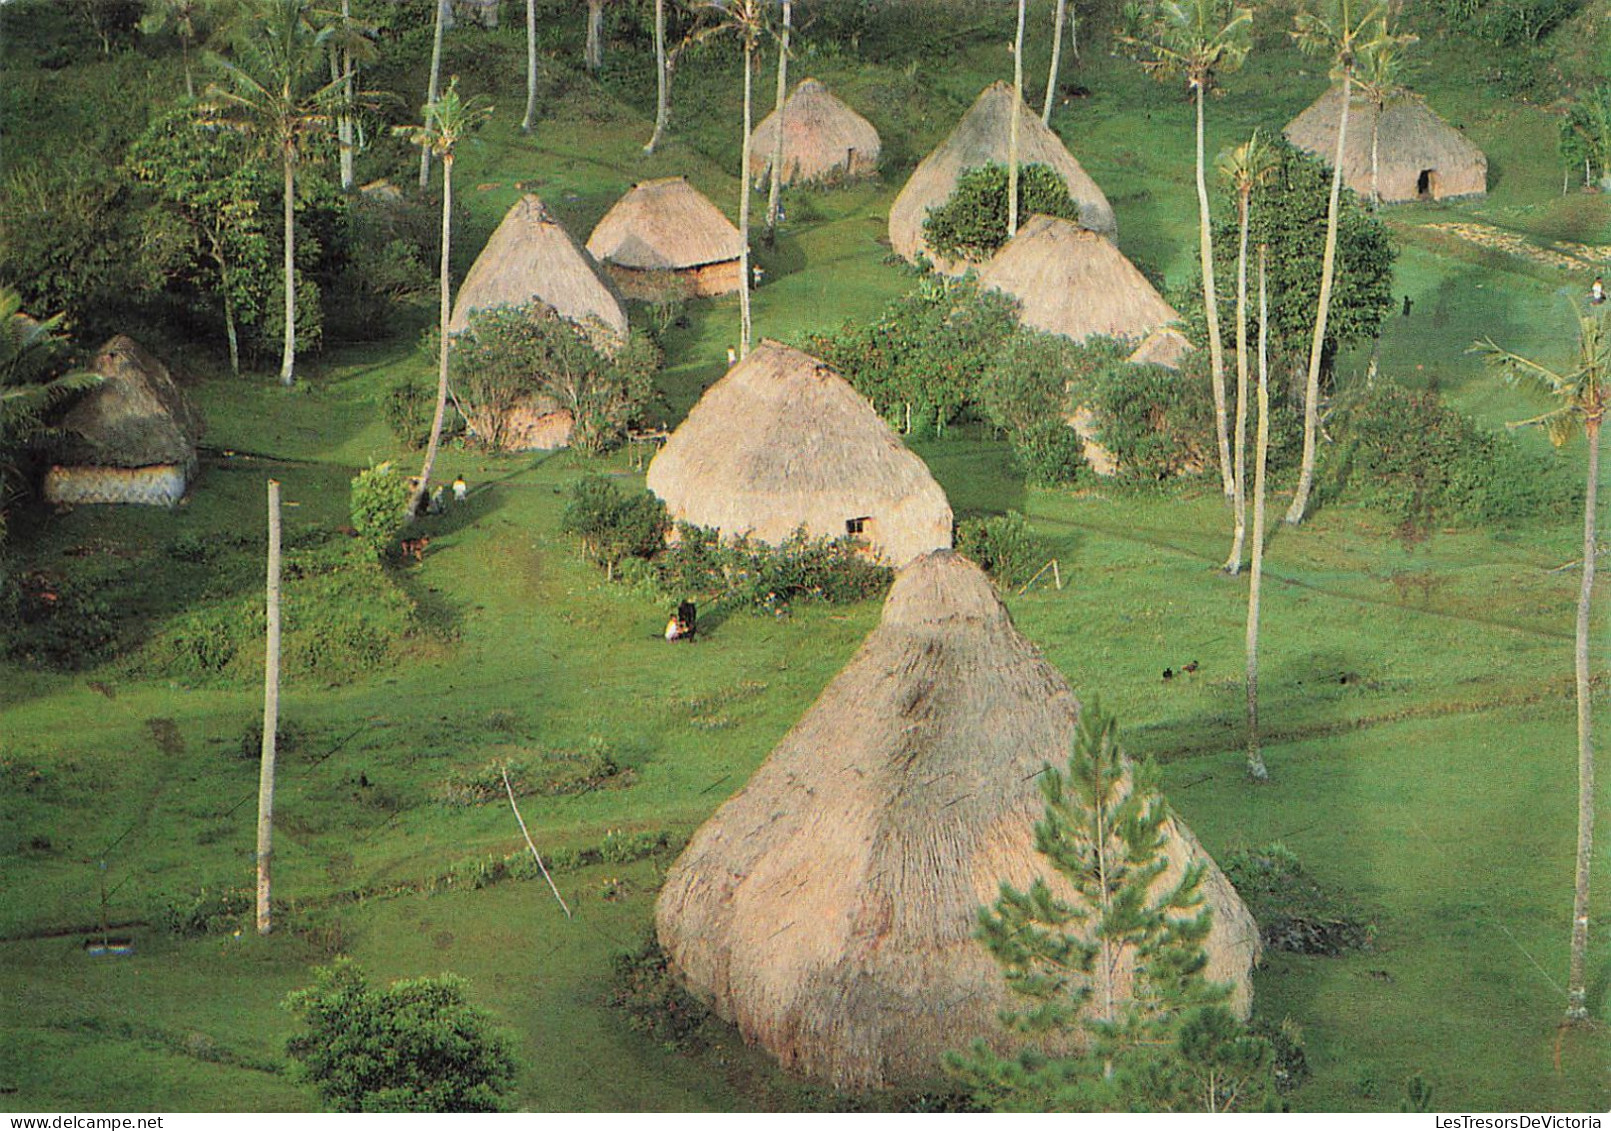 FIDJI - The Thatched Houses Called Bures Are Cool In The Summer And Warm In The Winter - Animé - Carte Postale - Fiji